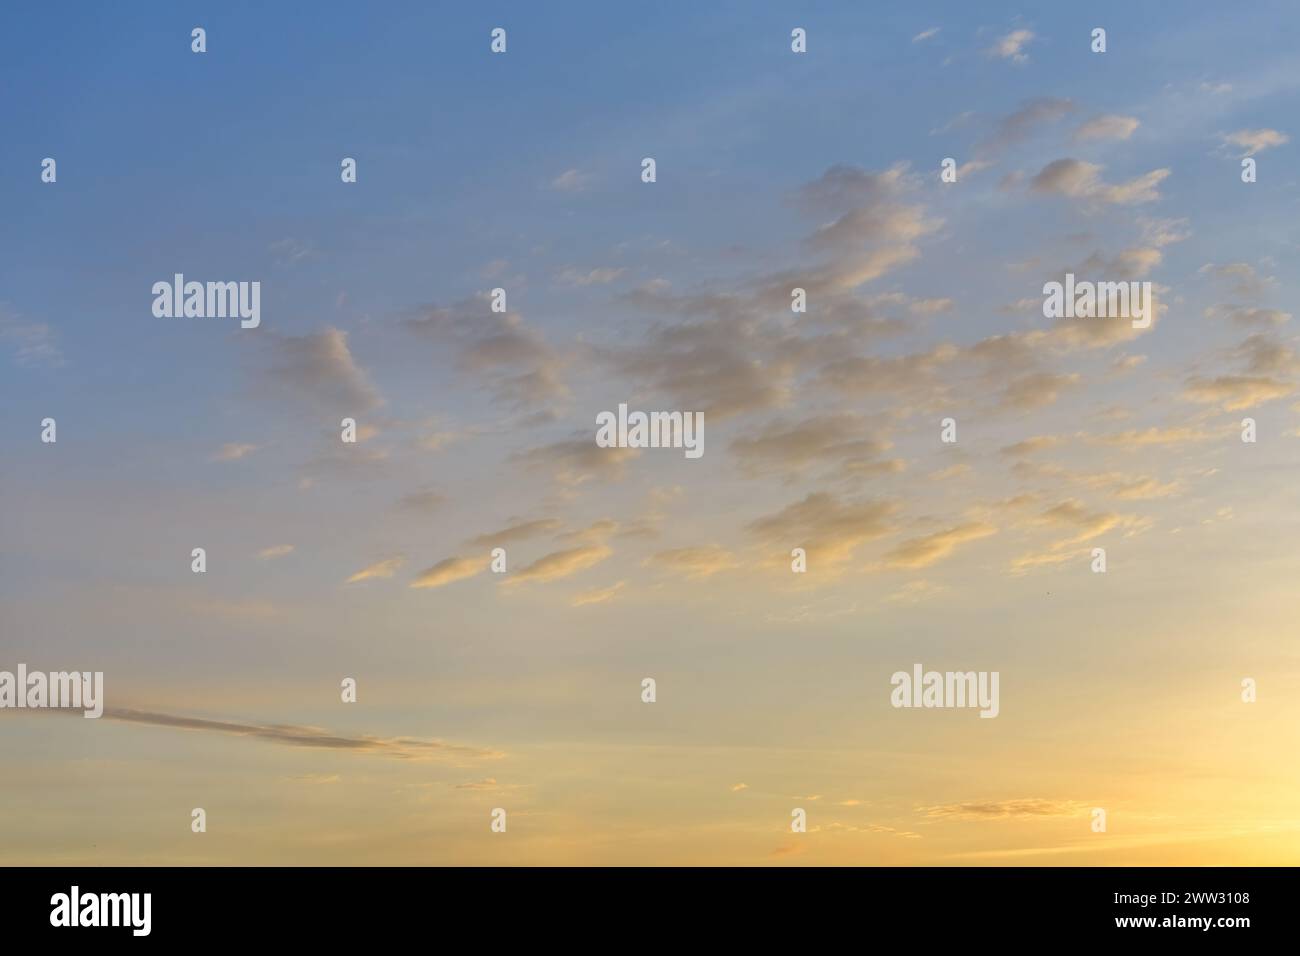 Sky only with clouds, design element Stock Photo